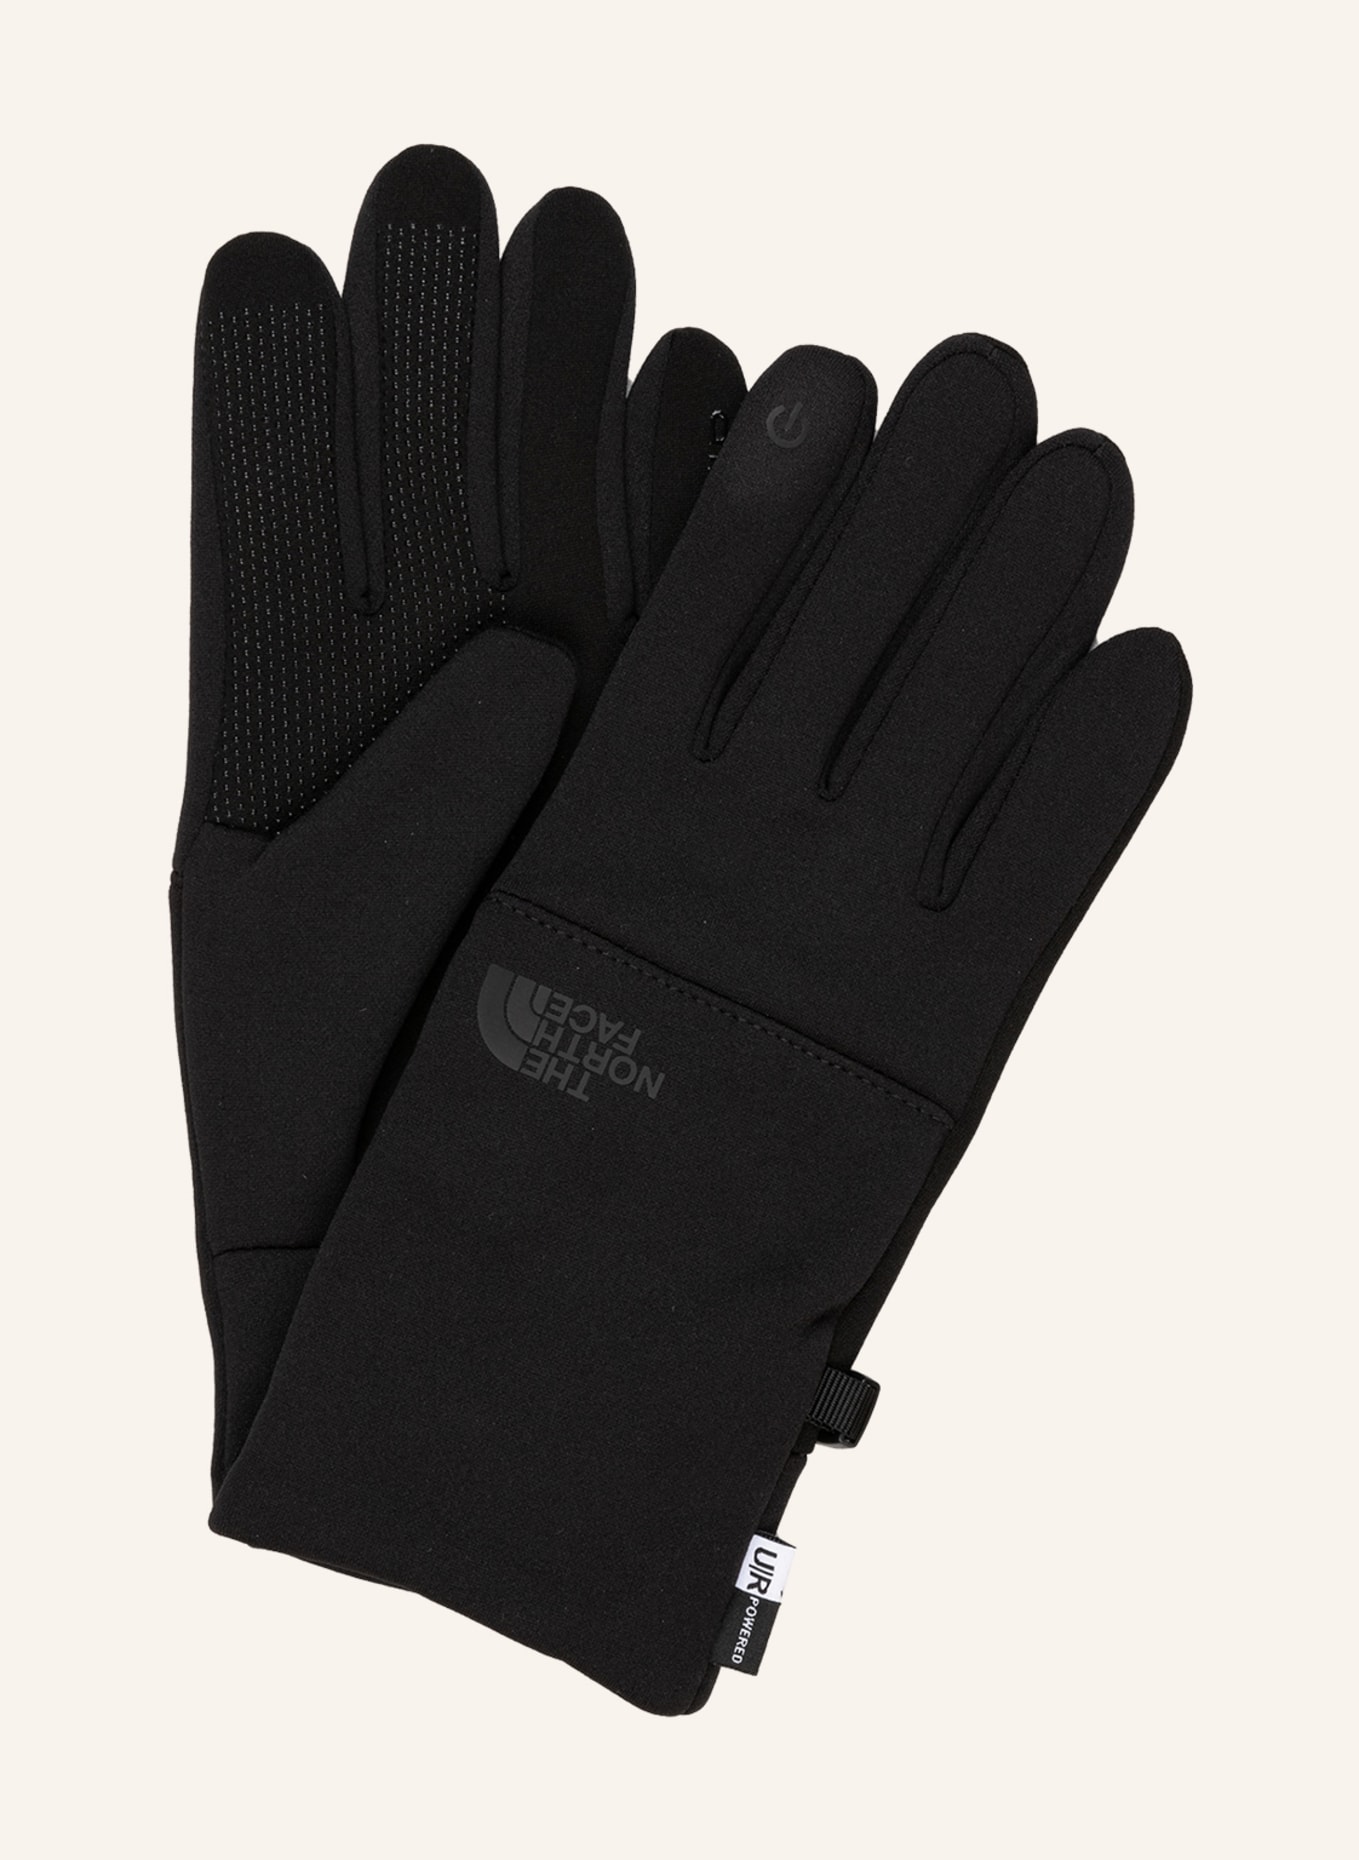 NORTH black gloves touchscreen ETIP FACE Multisport with function THE in